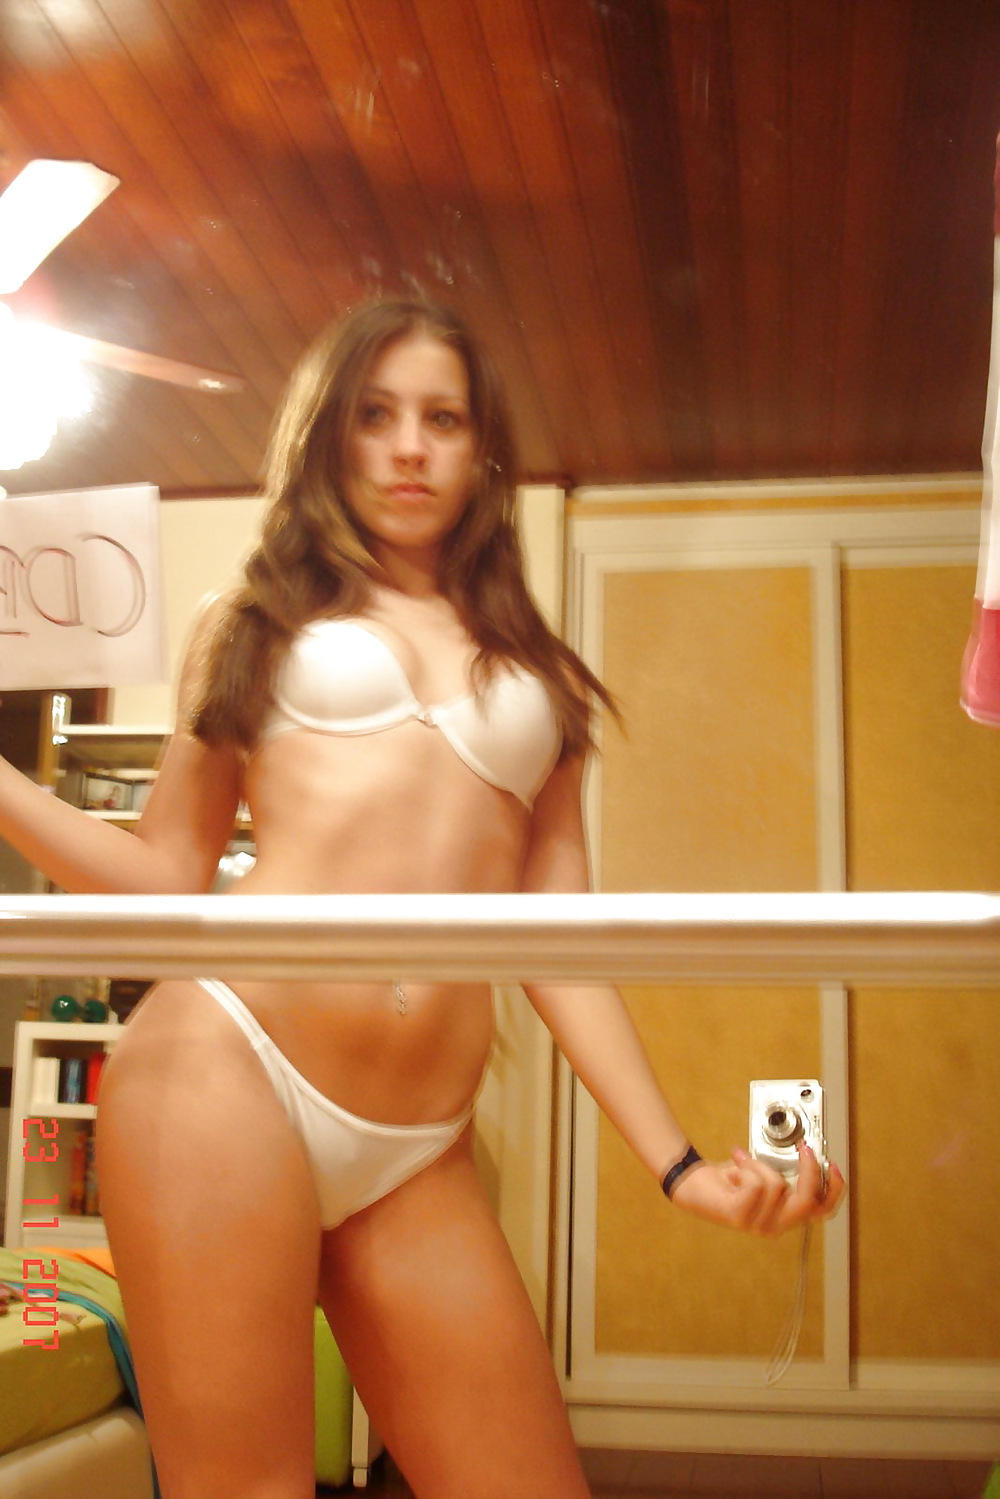 Hot Amateur Babe takes some Selfshots (UPDATE) adult photos